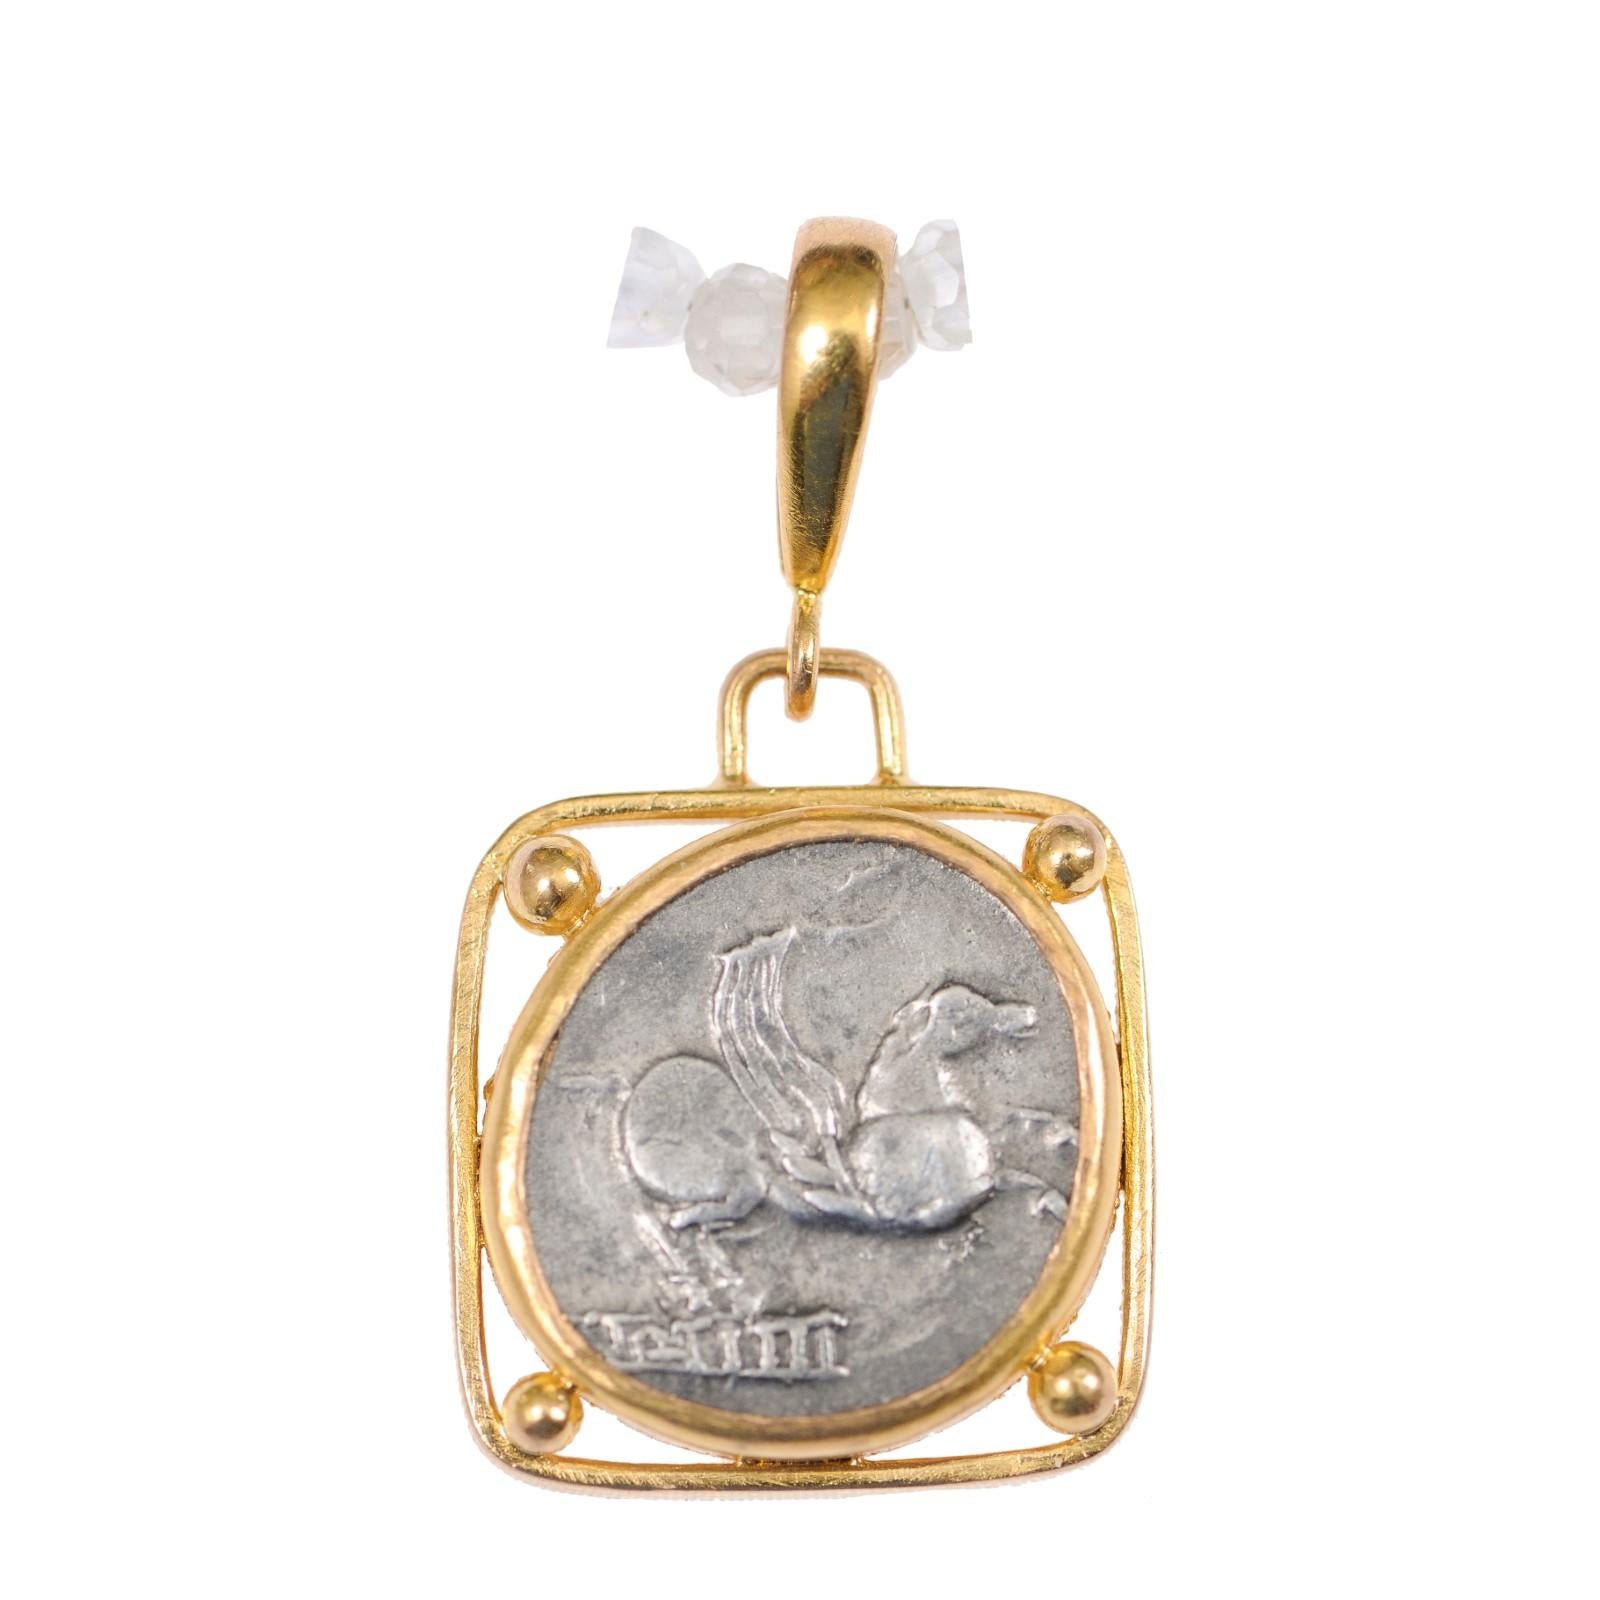 An authentic Q. Titius, silver denarius coin (Rome, circa 90 BC), set in a custom 22-karat gold bezel, suspended within a squared bezel with gold bead accents at each corner, and 22-karat gold bail. The obverse, or front, side of this coin features